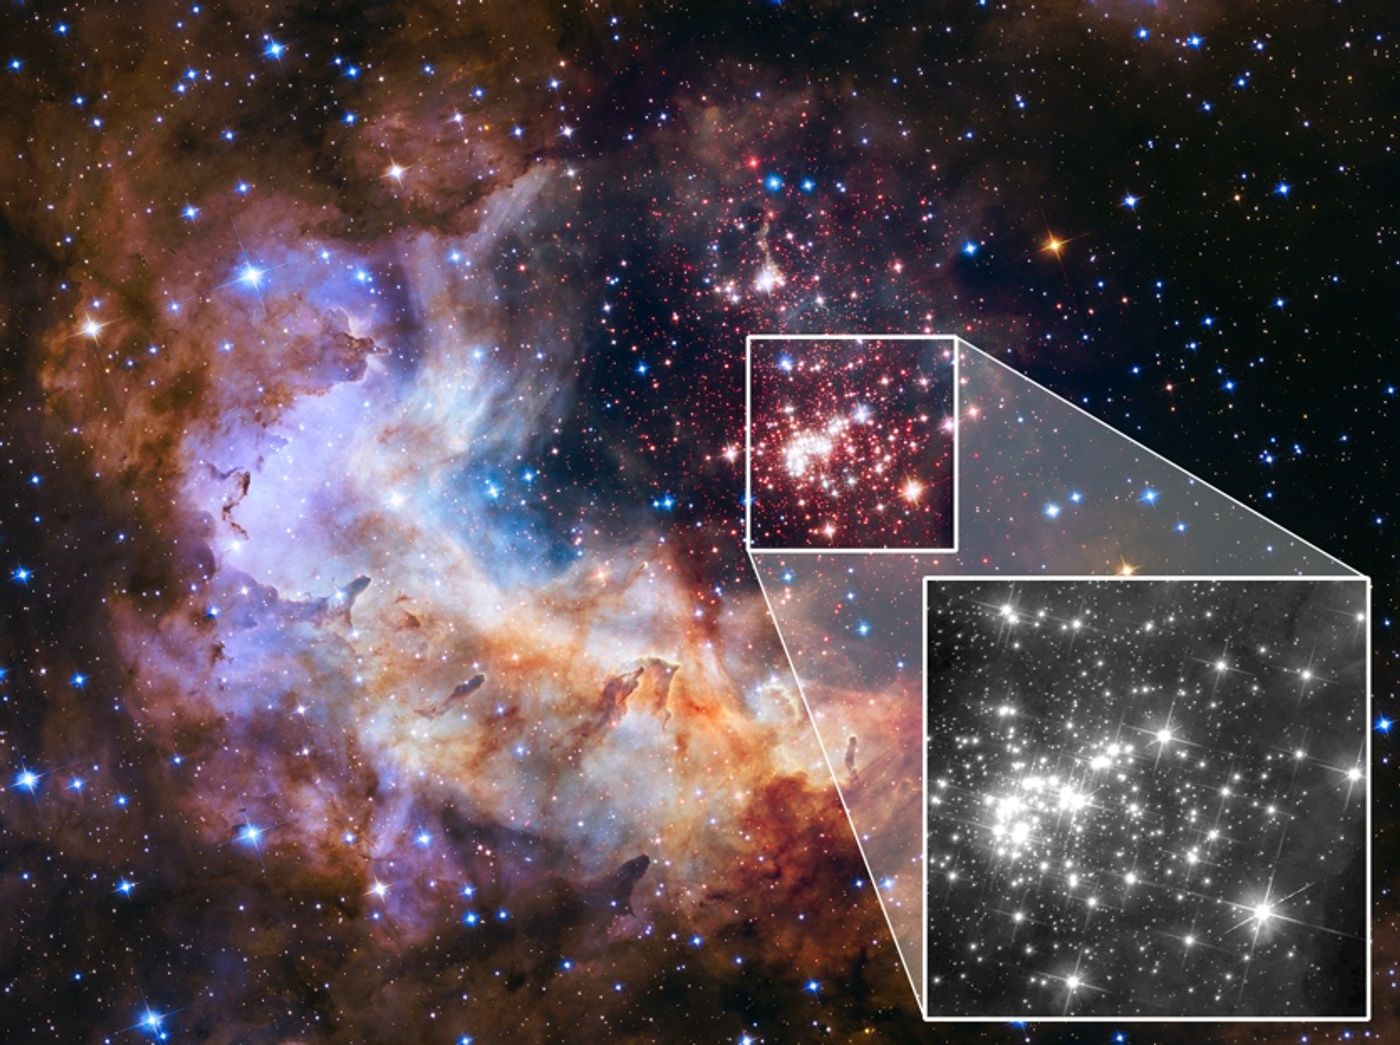 Westerlund 2 is a young star cluster that NASA hopes to study with the JWST. Hubble has already peered at it extensively.